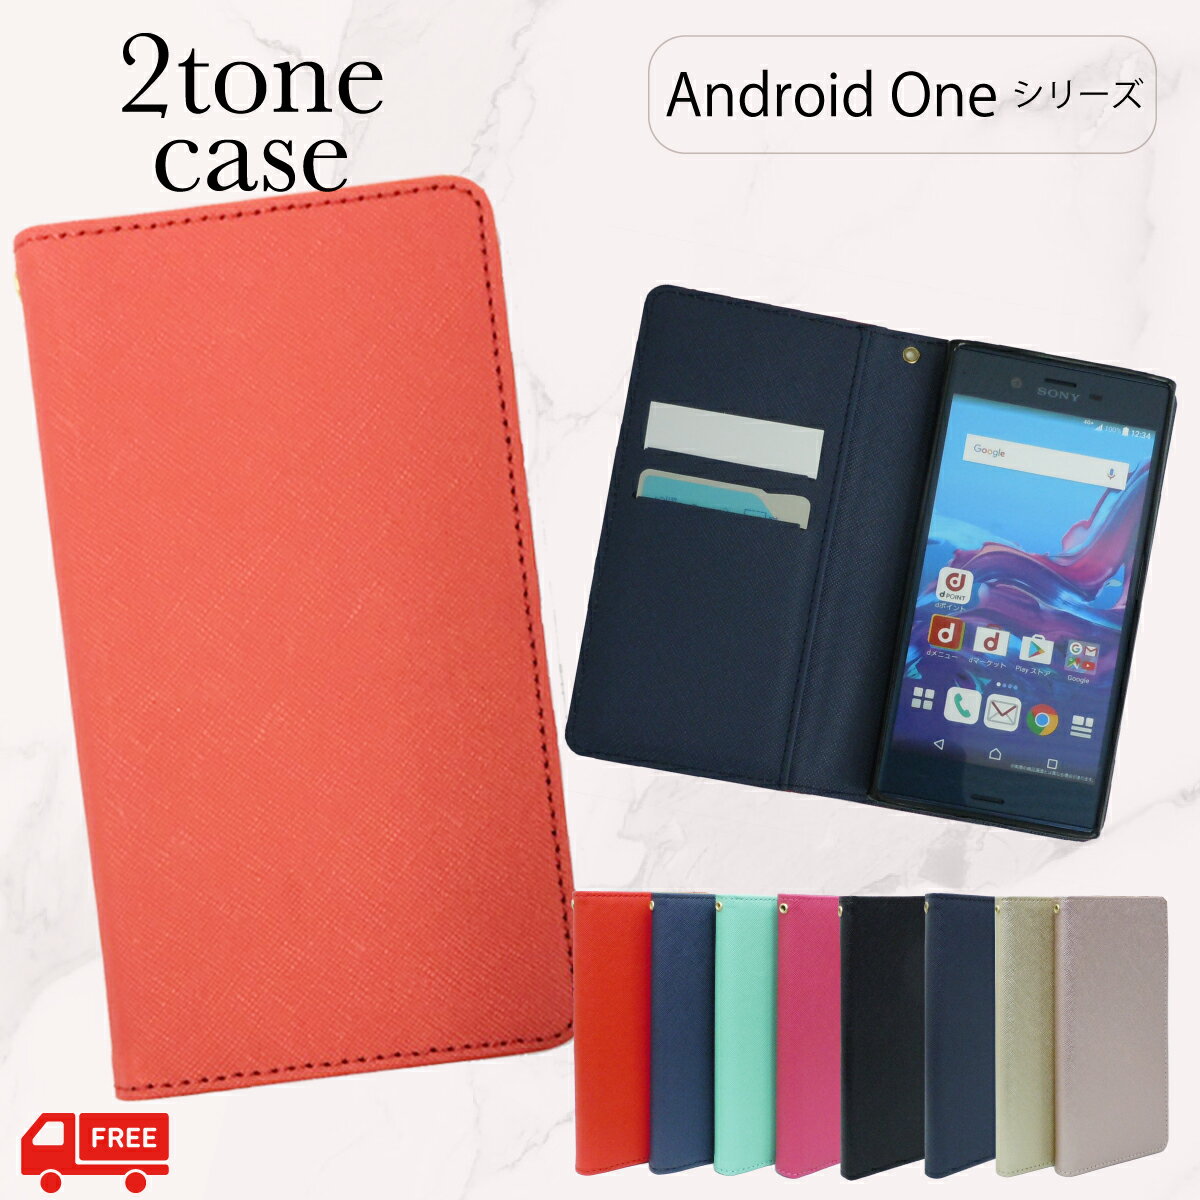 Android One S3 S4 S5 S7 ...の商品画像